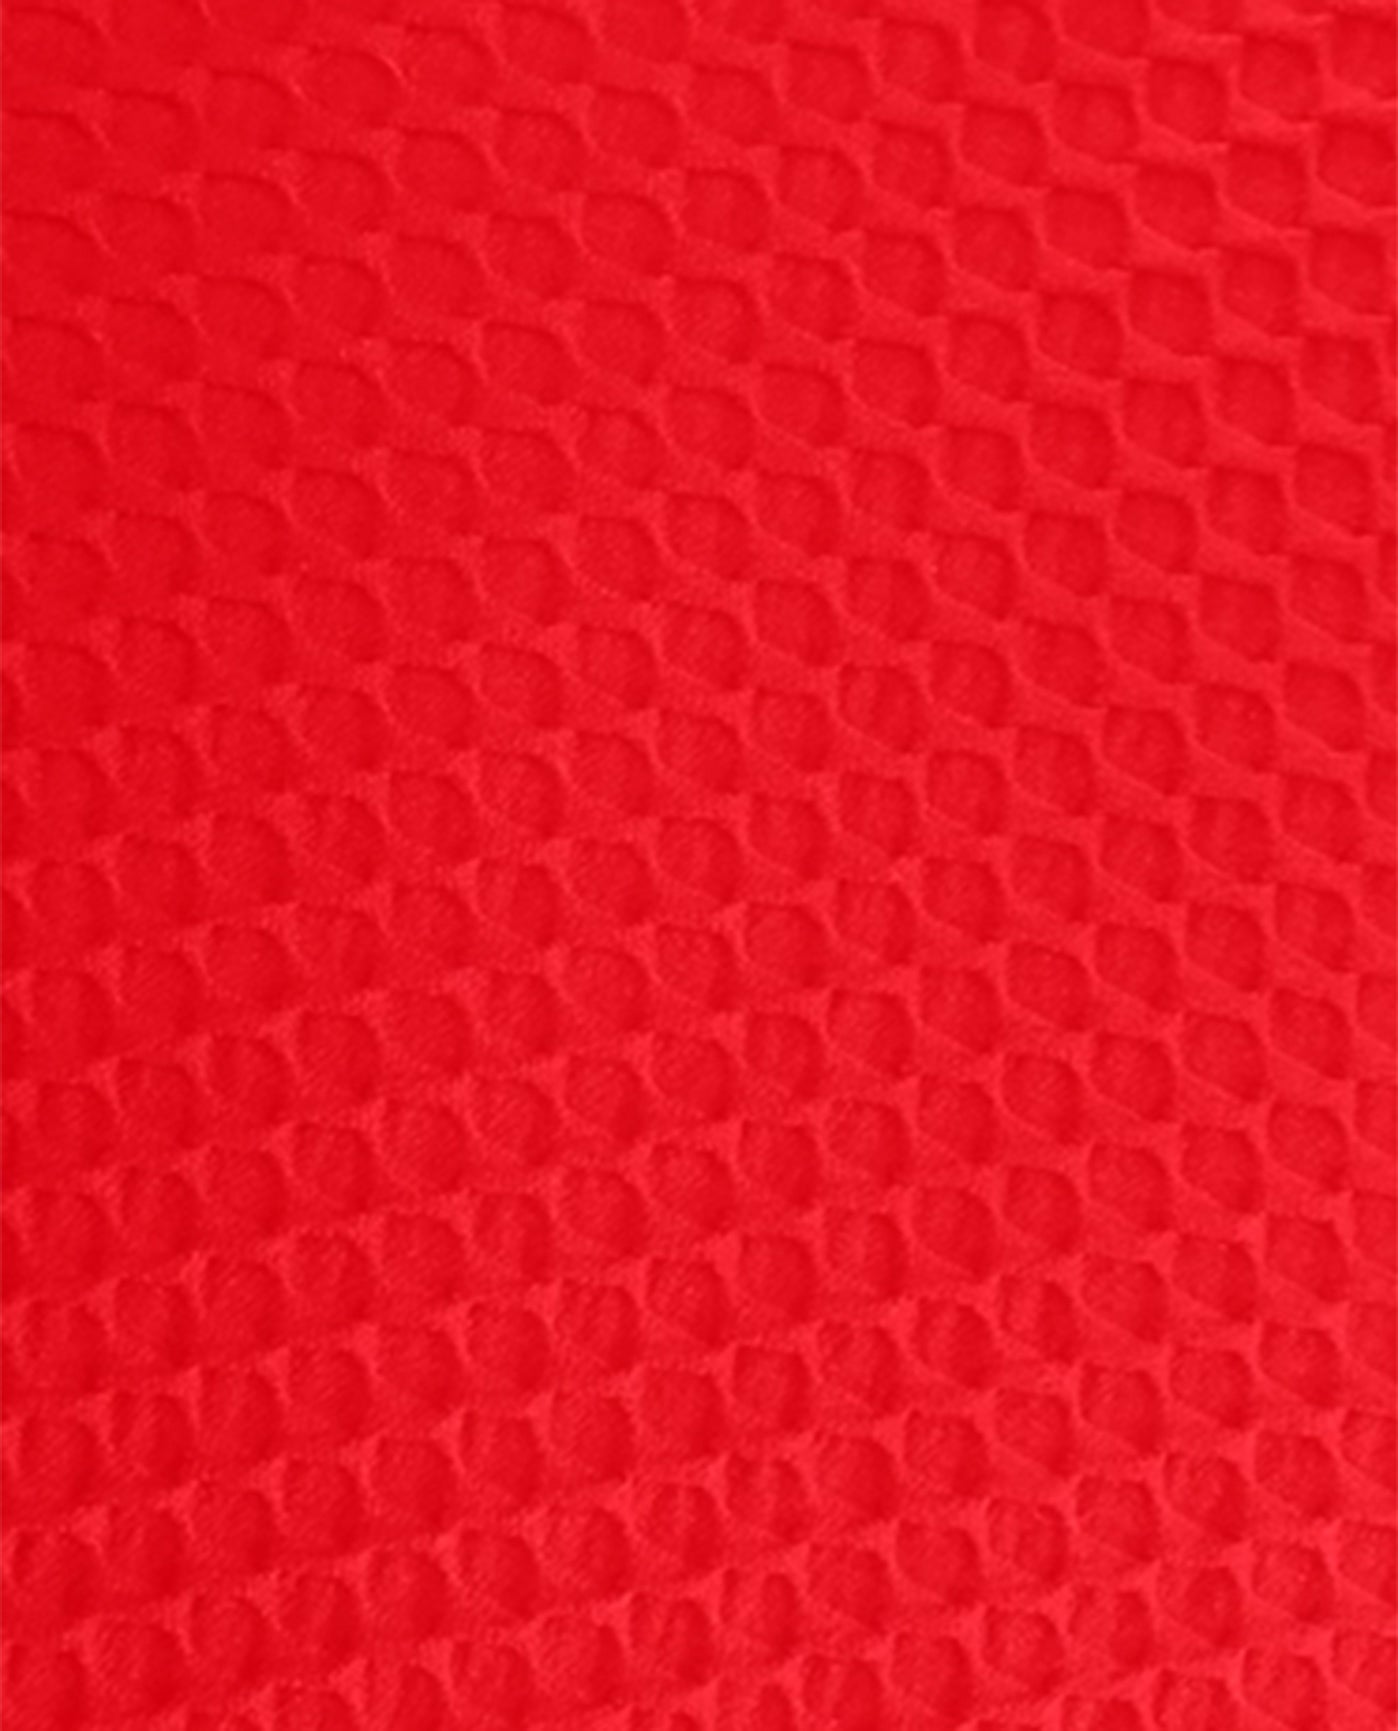 FABRIC SWATCH VIEW OF CHLORINE RESISTANT AQUAMORE SOLID TEXTURED HIGH NECK LONG TORSO ONE PIECE SWIMSUIT | 512 AQT TEXTURED SCARLET